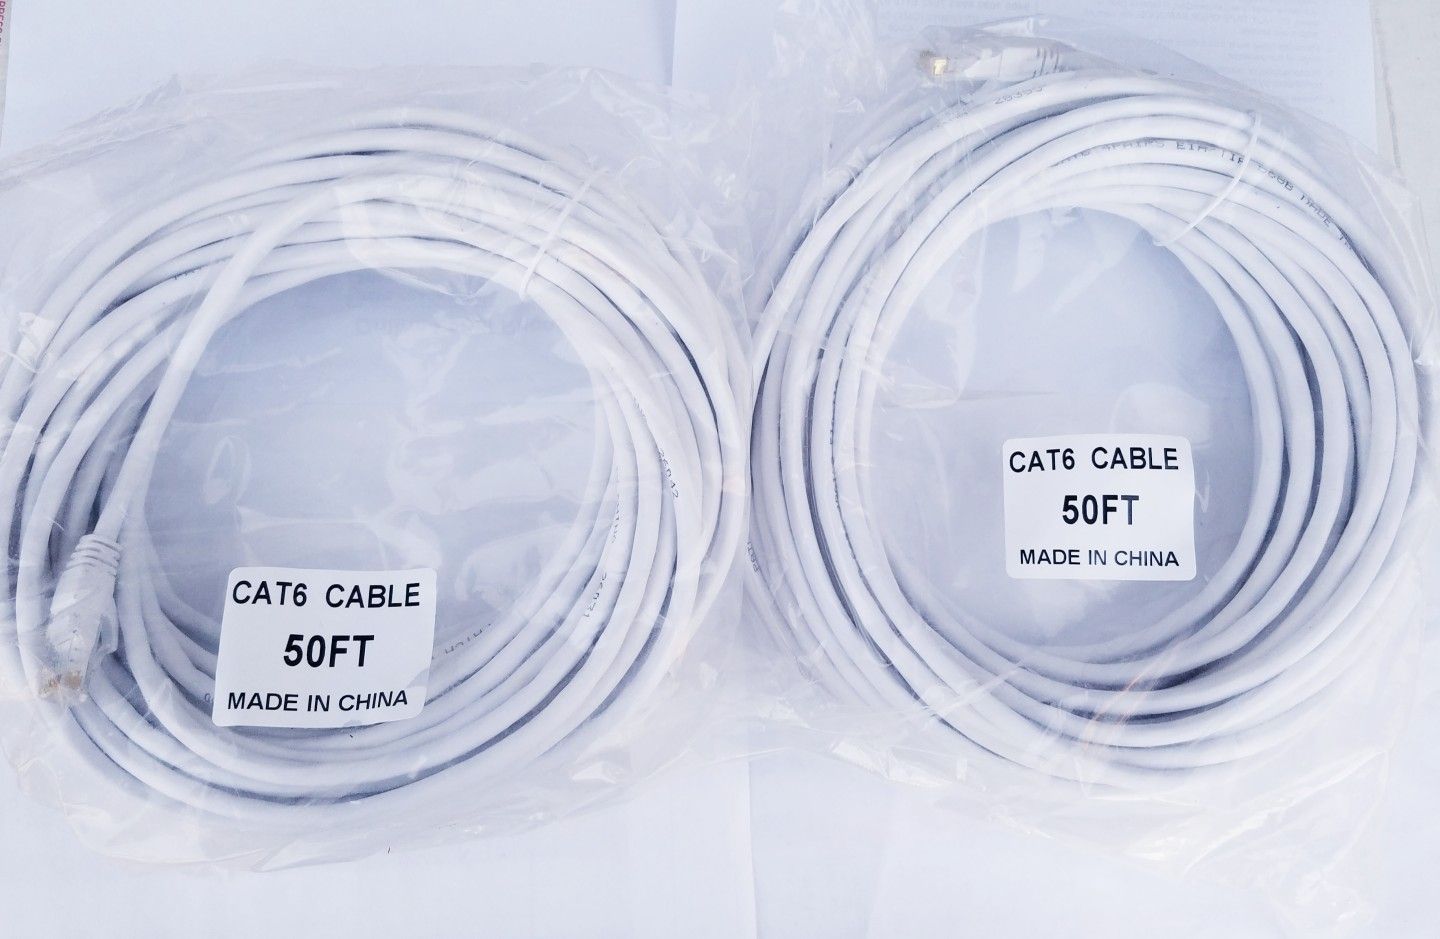 Set of two 50ft cat6 ethernet network cables